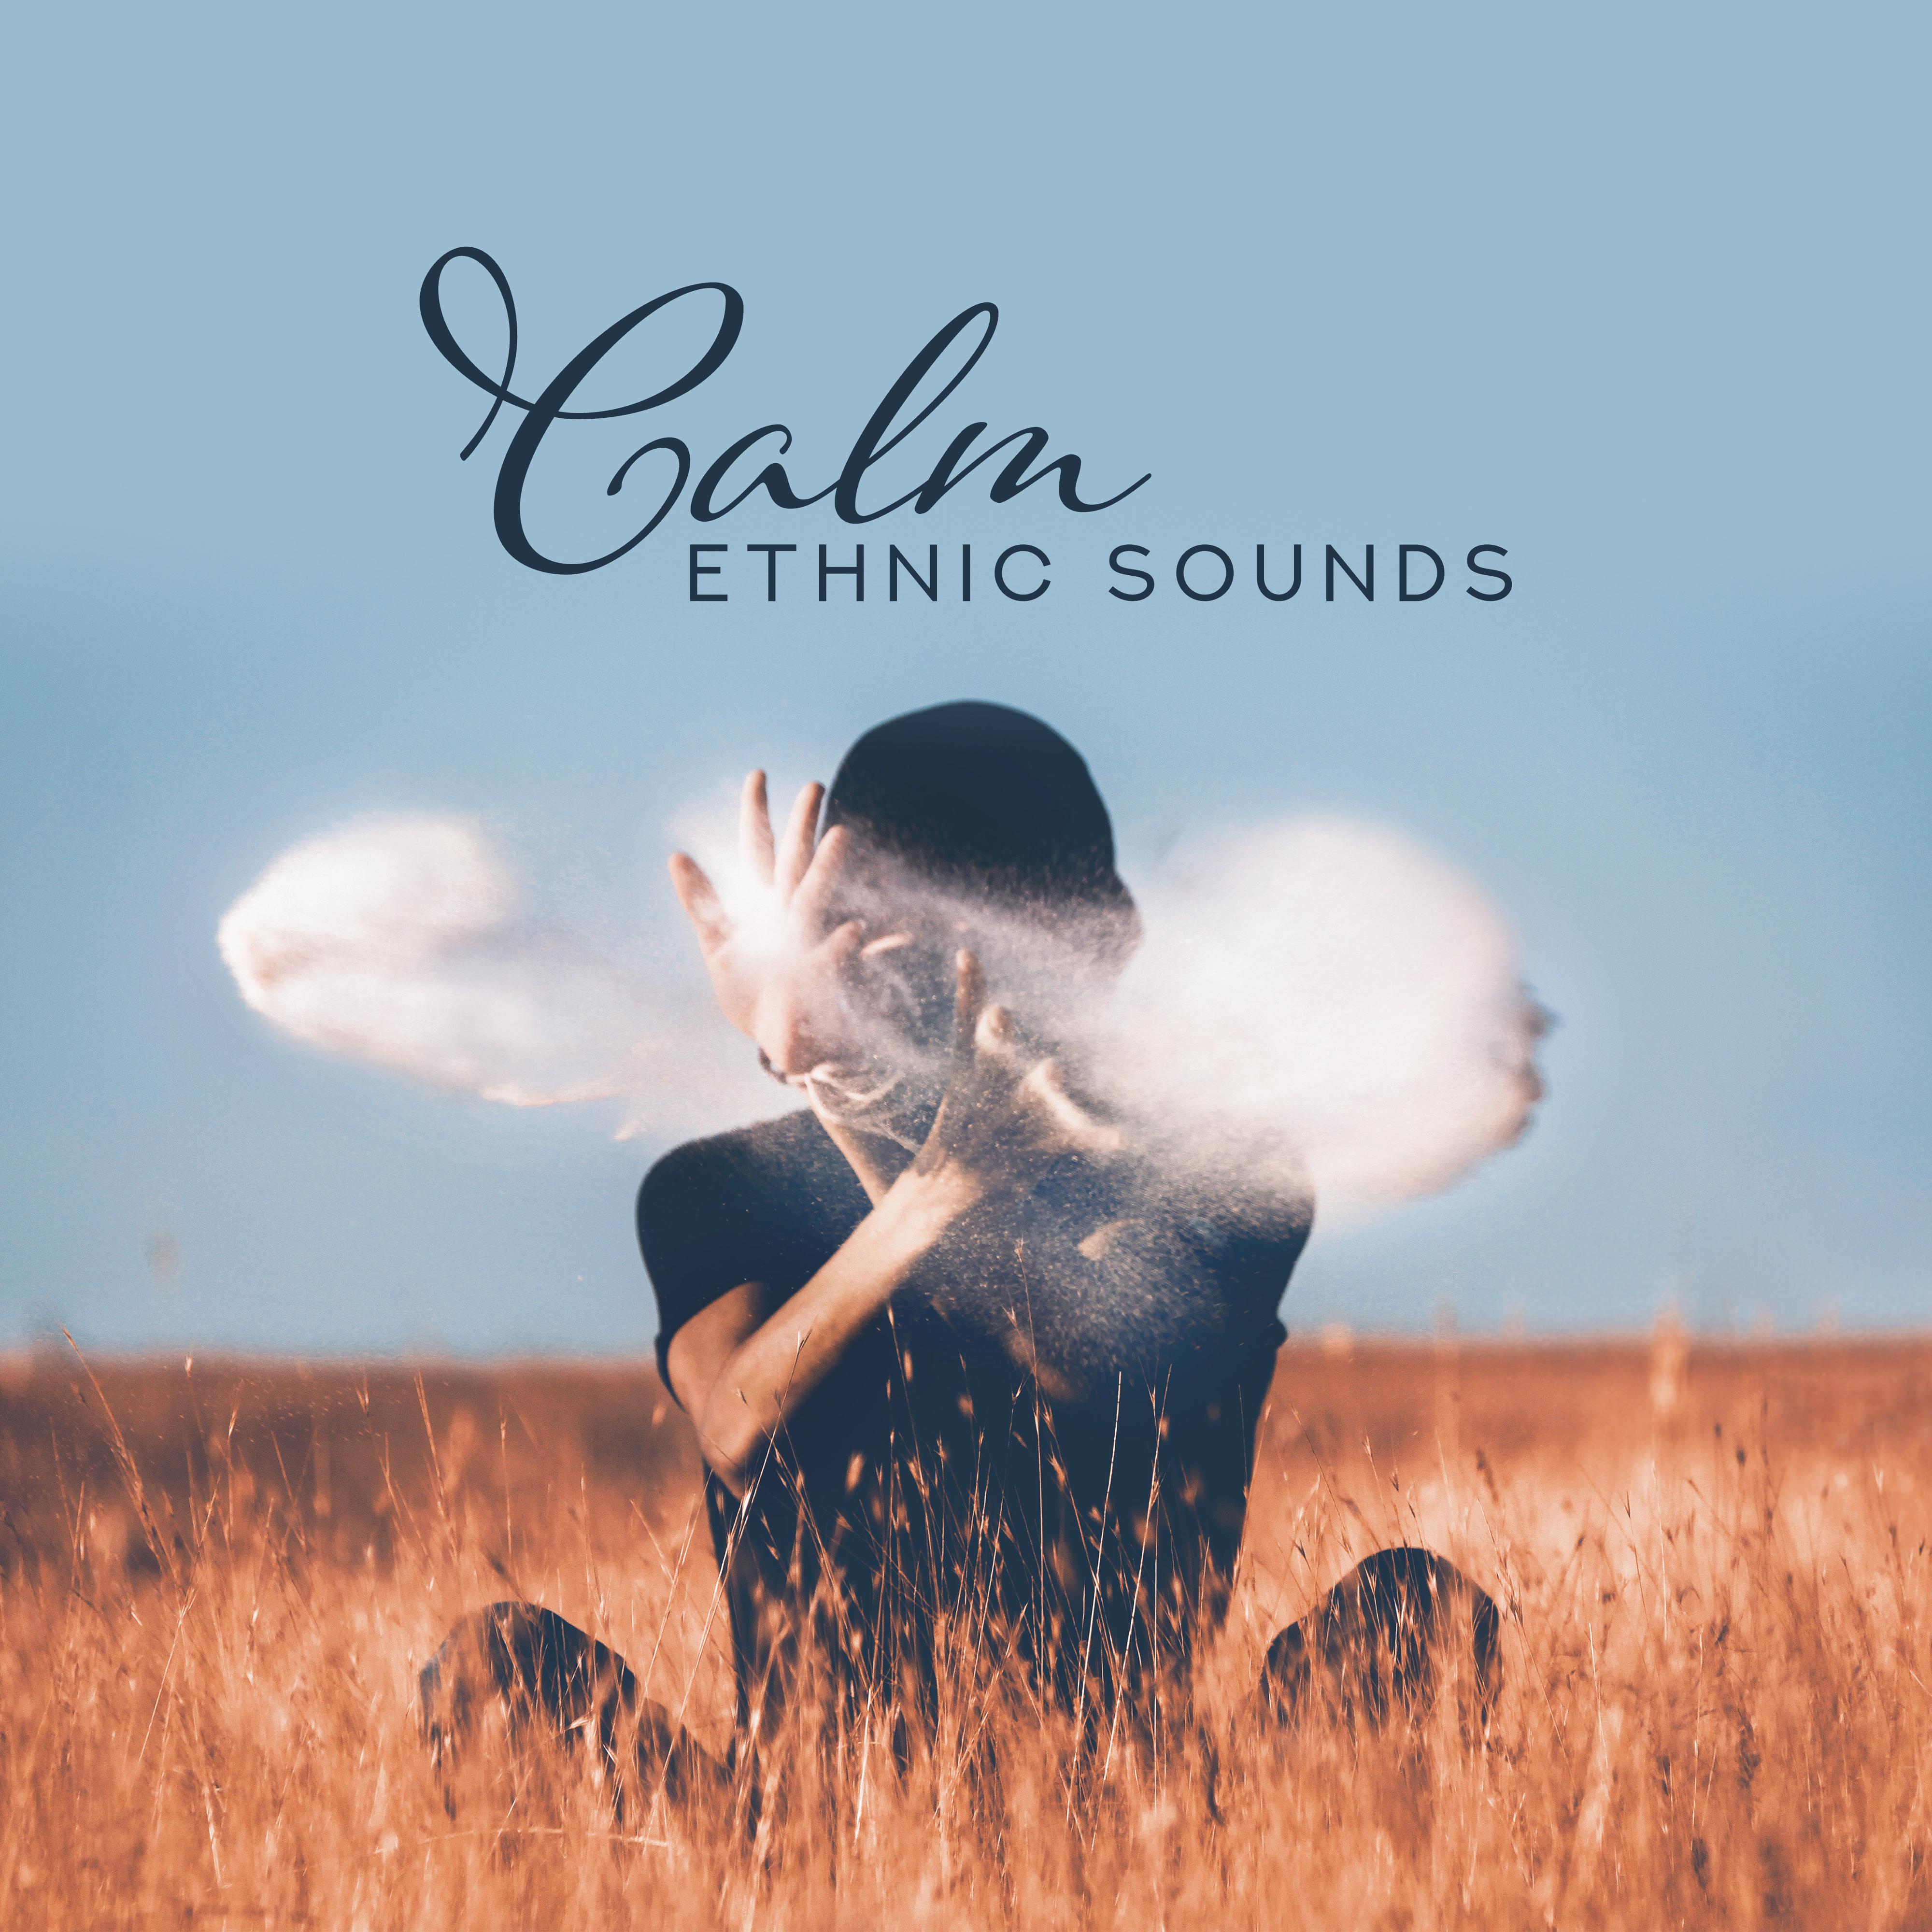 Calm Ethnic Sounds - Intercontinental Music from Around the World